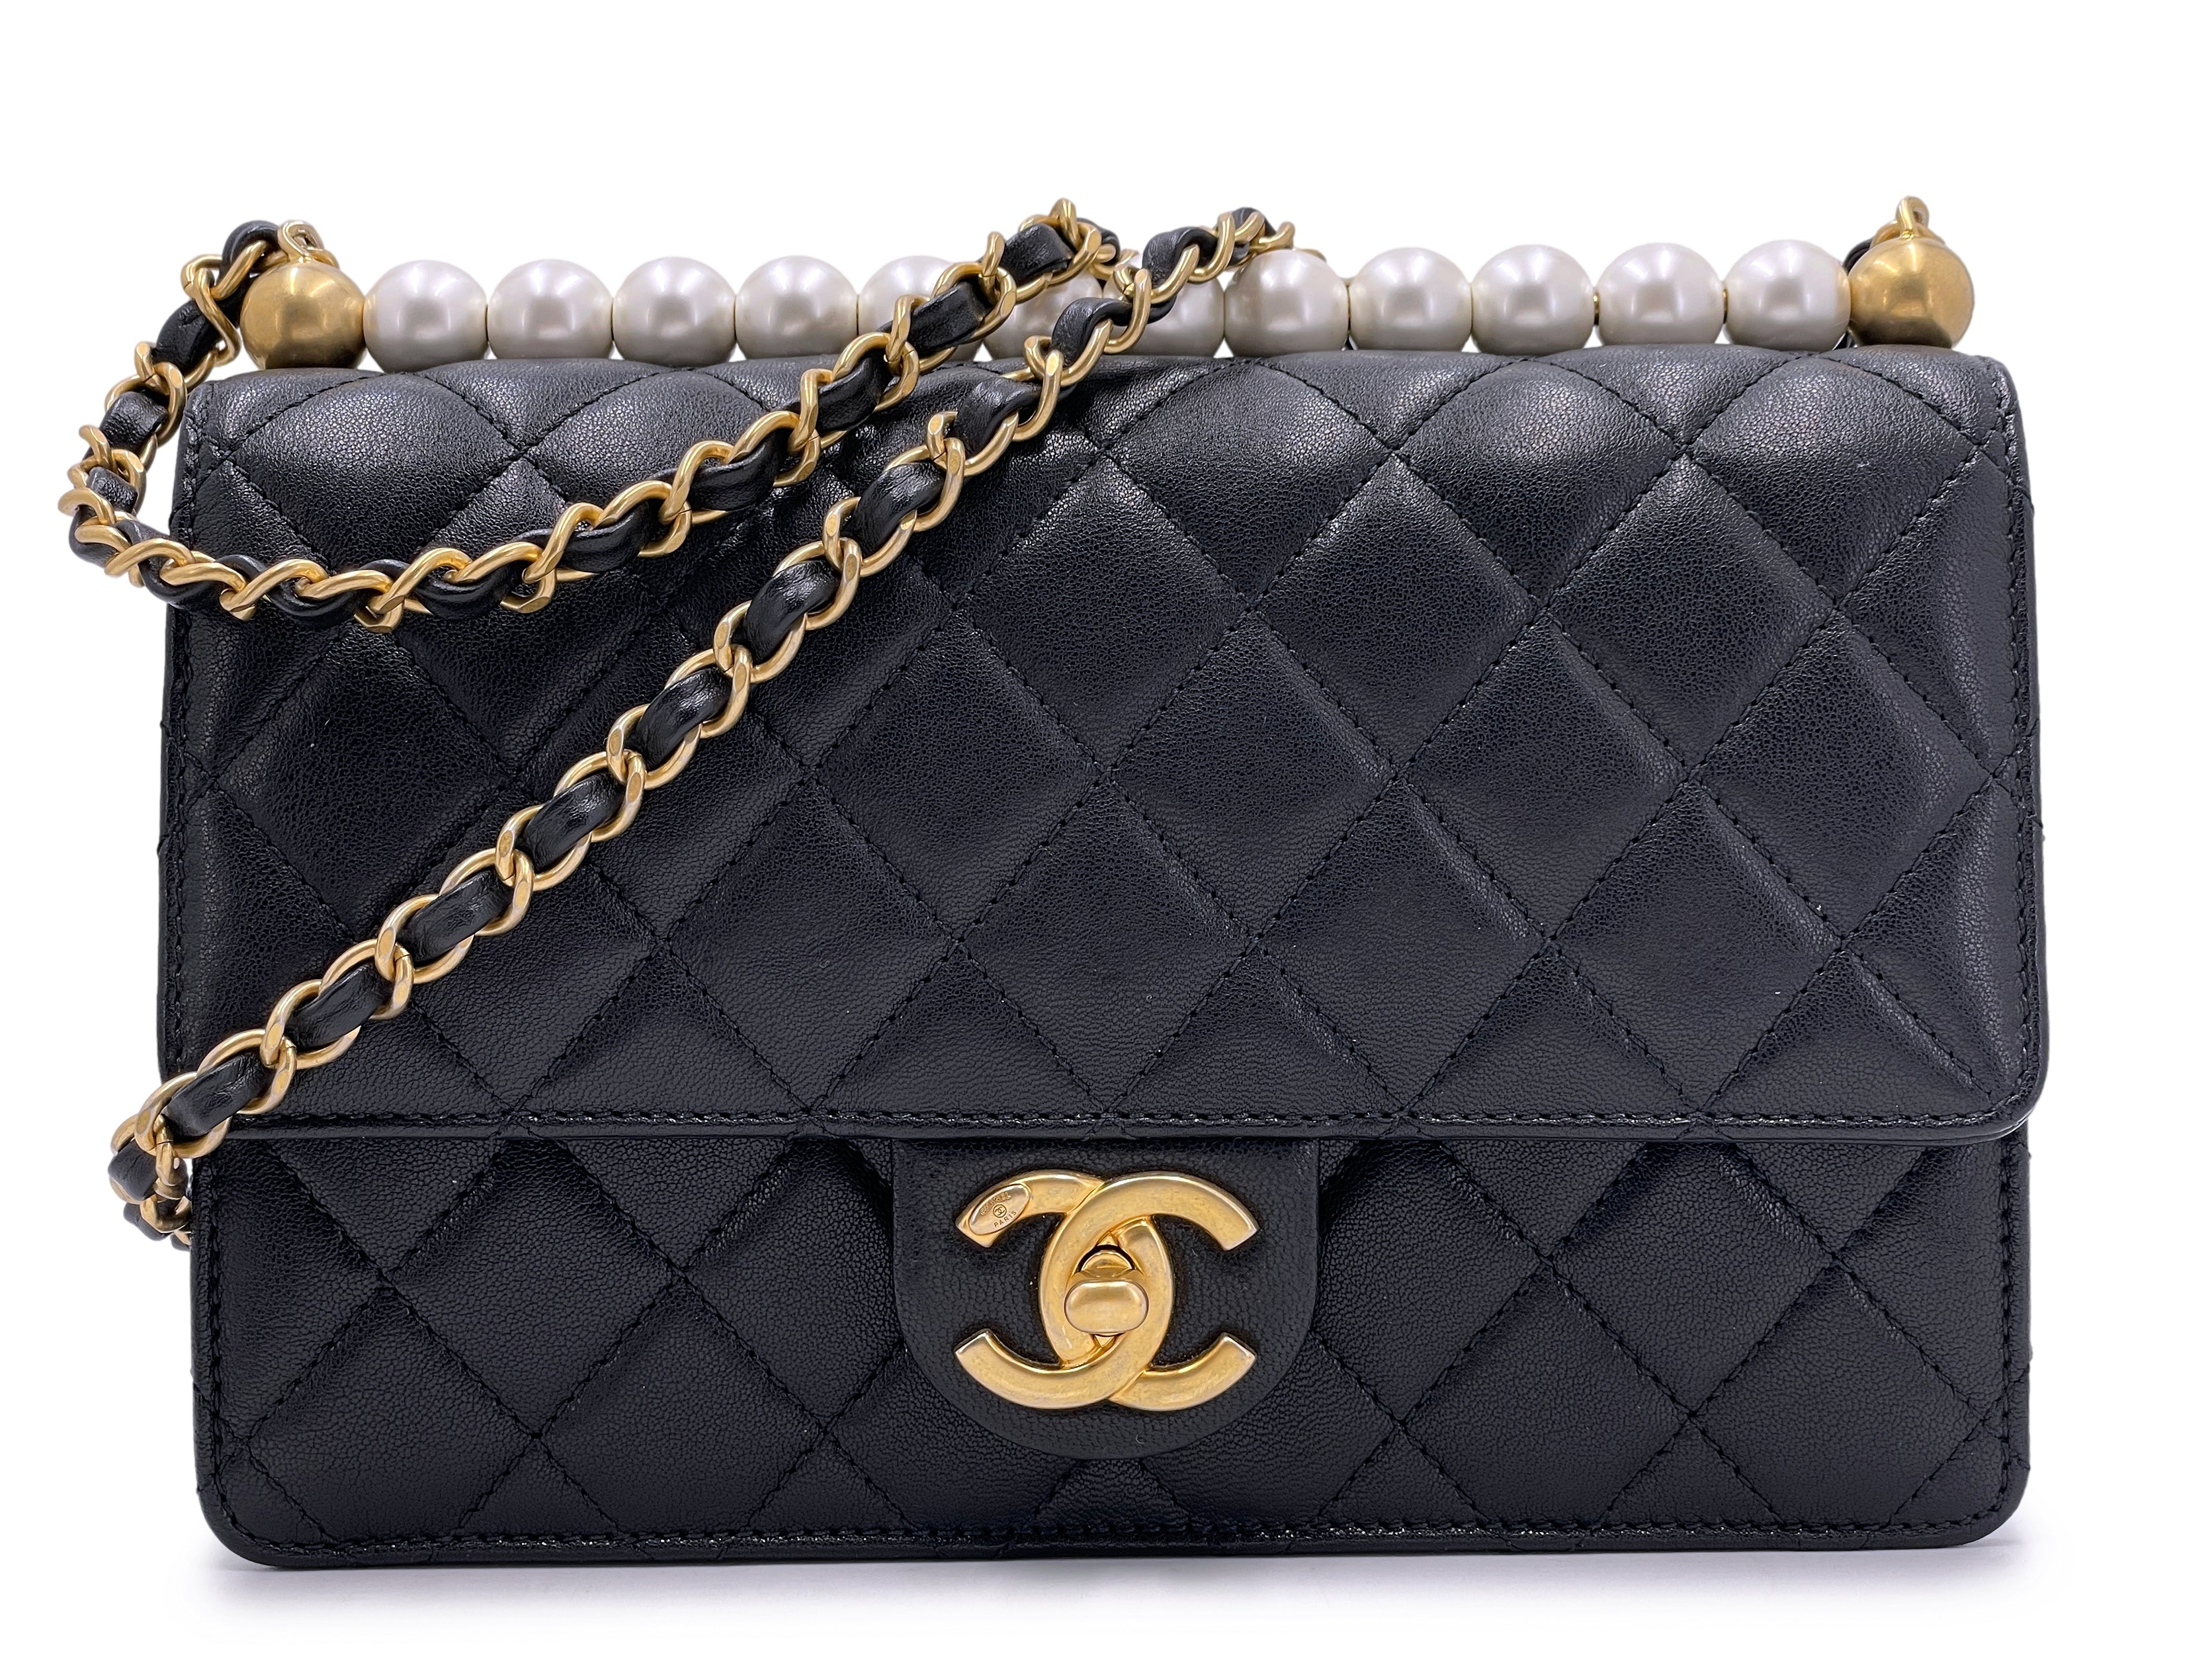 CHANEL Black Chevron Quilted Leather CC Turn-Lock Flap Shoulder